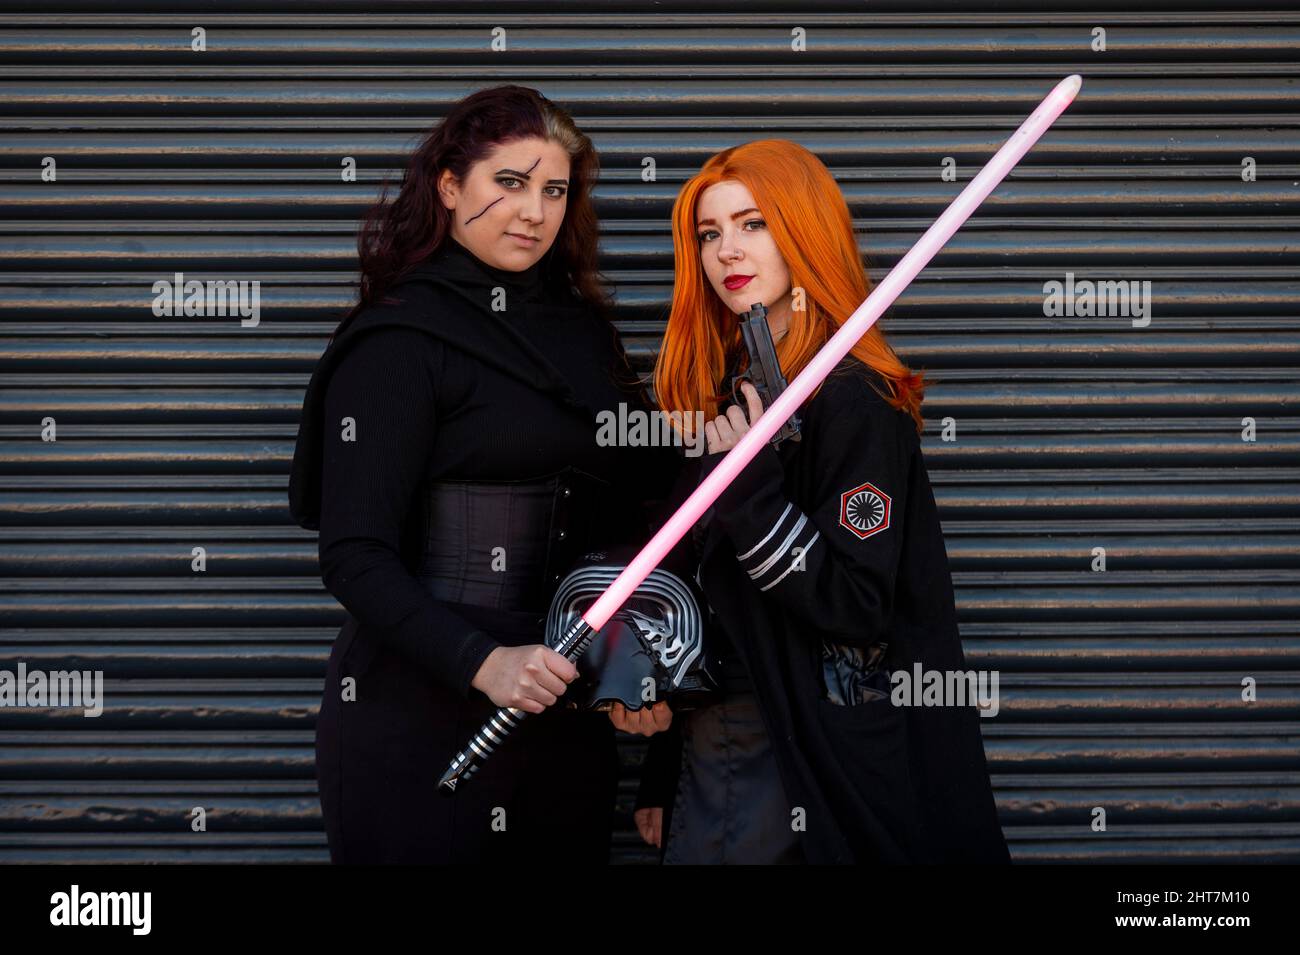 London, UK.  27 February 2022.  Women dressed as Kylo Ren and General Hux from Star Wars arrive at London Comic Con Spring held in Kensington Olympia.  The festival celebrates comics, film and TV.  Credit: Stephen Chung / Alamy Live News Stock Photo